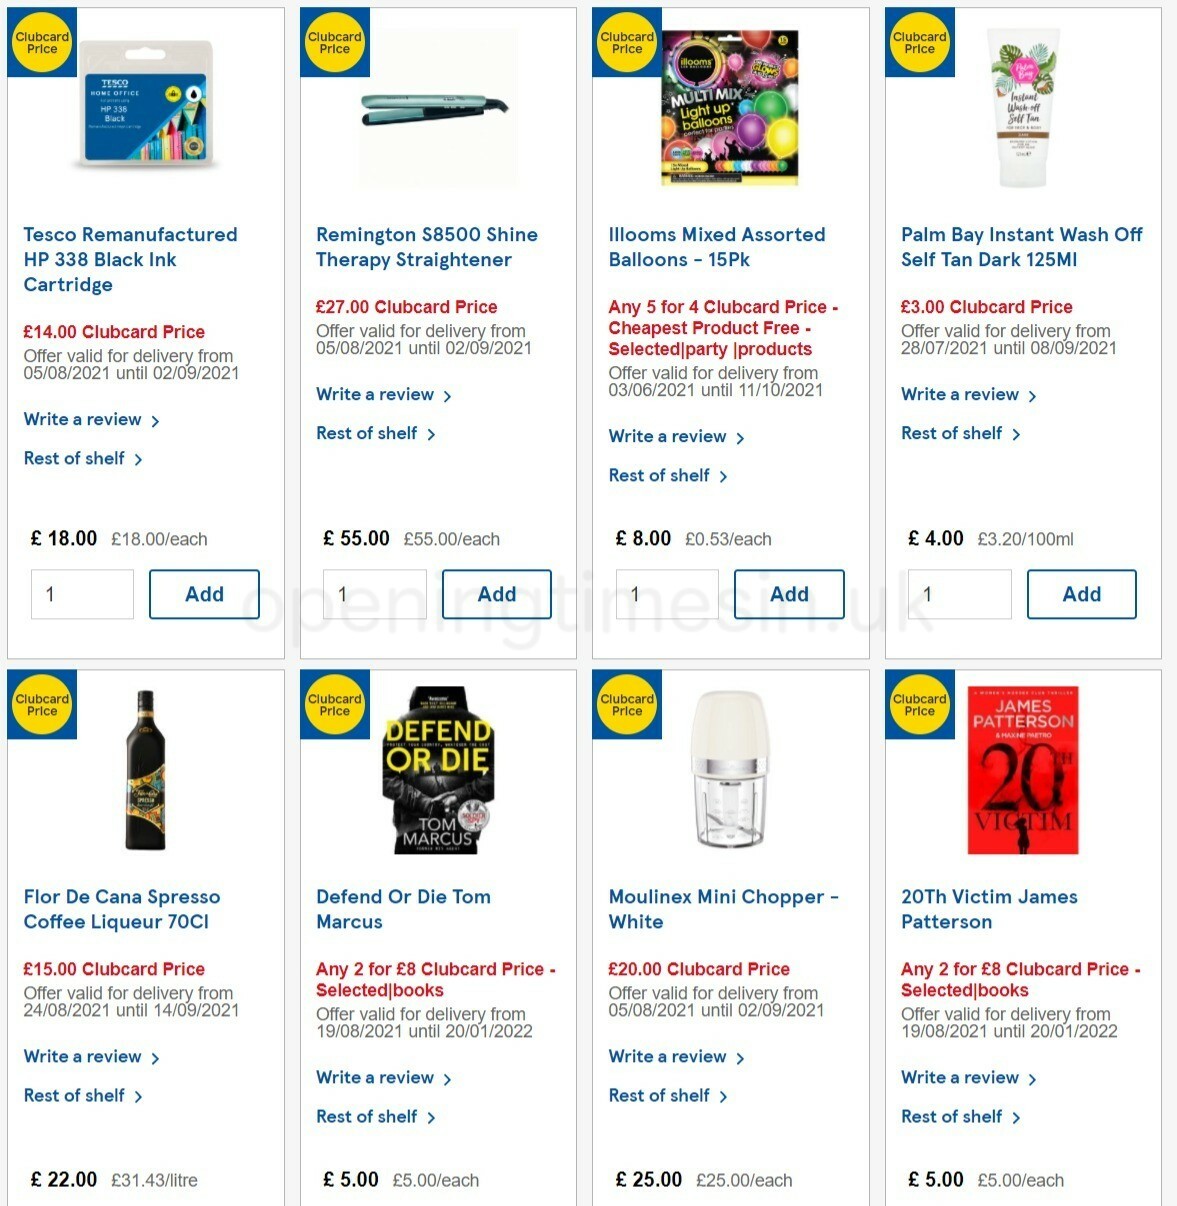 TESCO Offers from 25 August